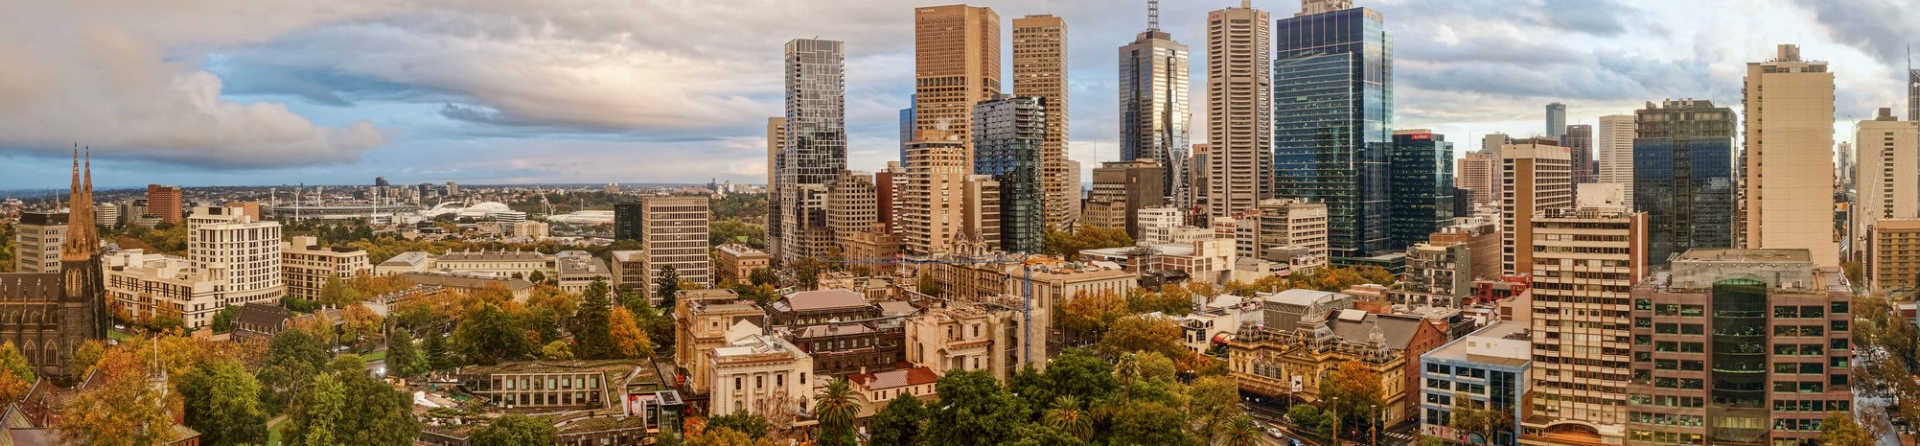 What is Melbourne known for?